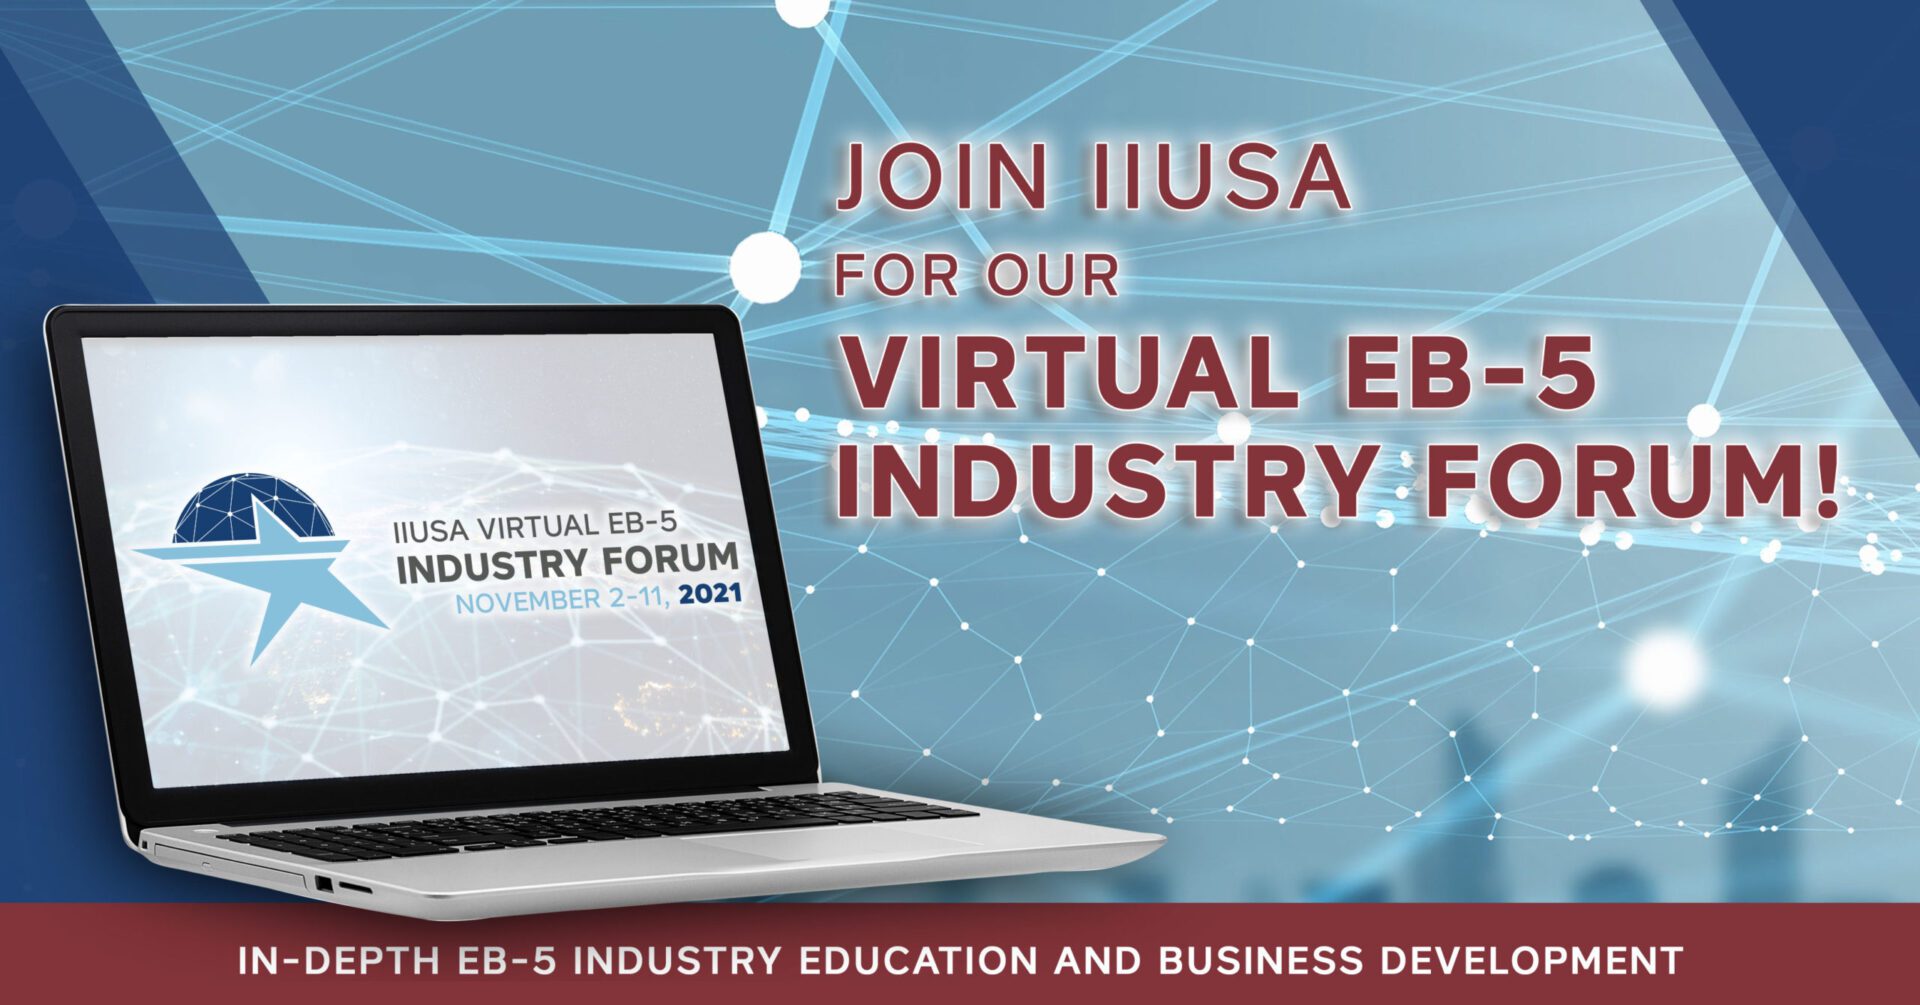 See You at the Virtual EB-5 Industry Forum!